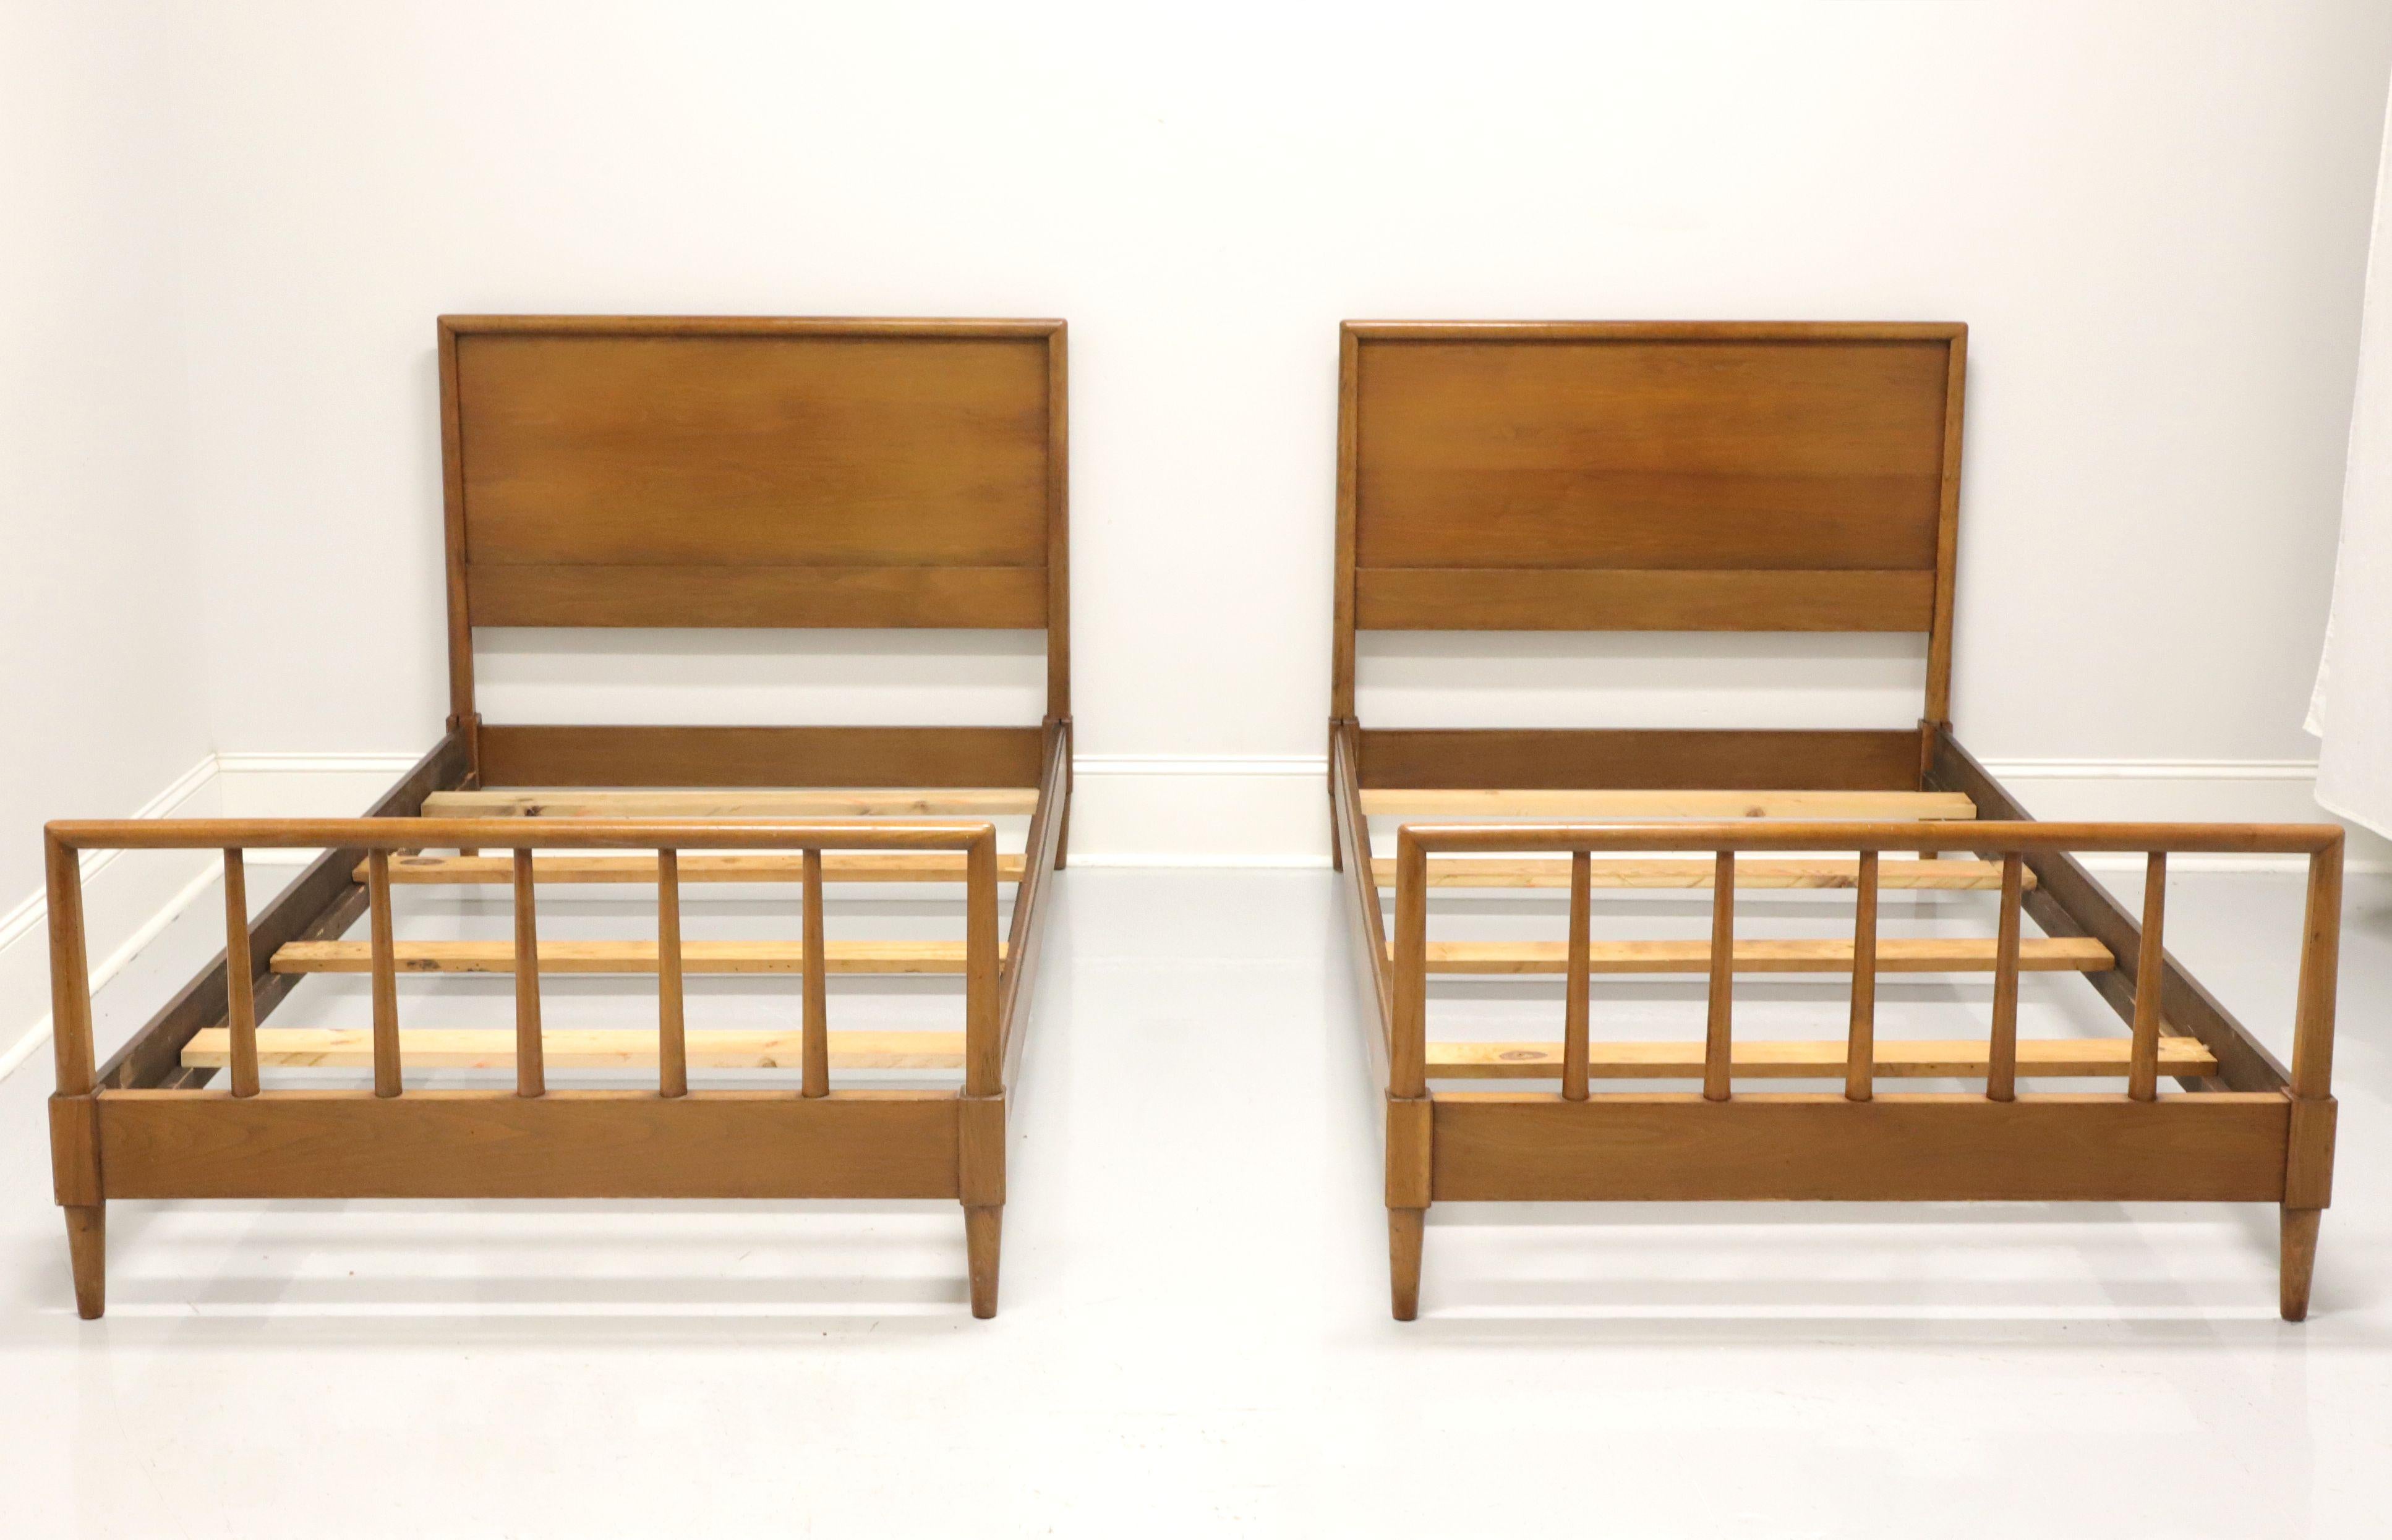 A pair of Mid-Century Modern twin beds by Henredon, from their Circa '60 Collection. Solid walnut headboard and matching footboard with open accents. Side rails connect the headboard and footboard, with wood slats providing mattress support. Made in